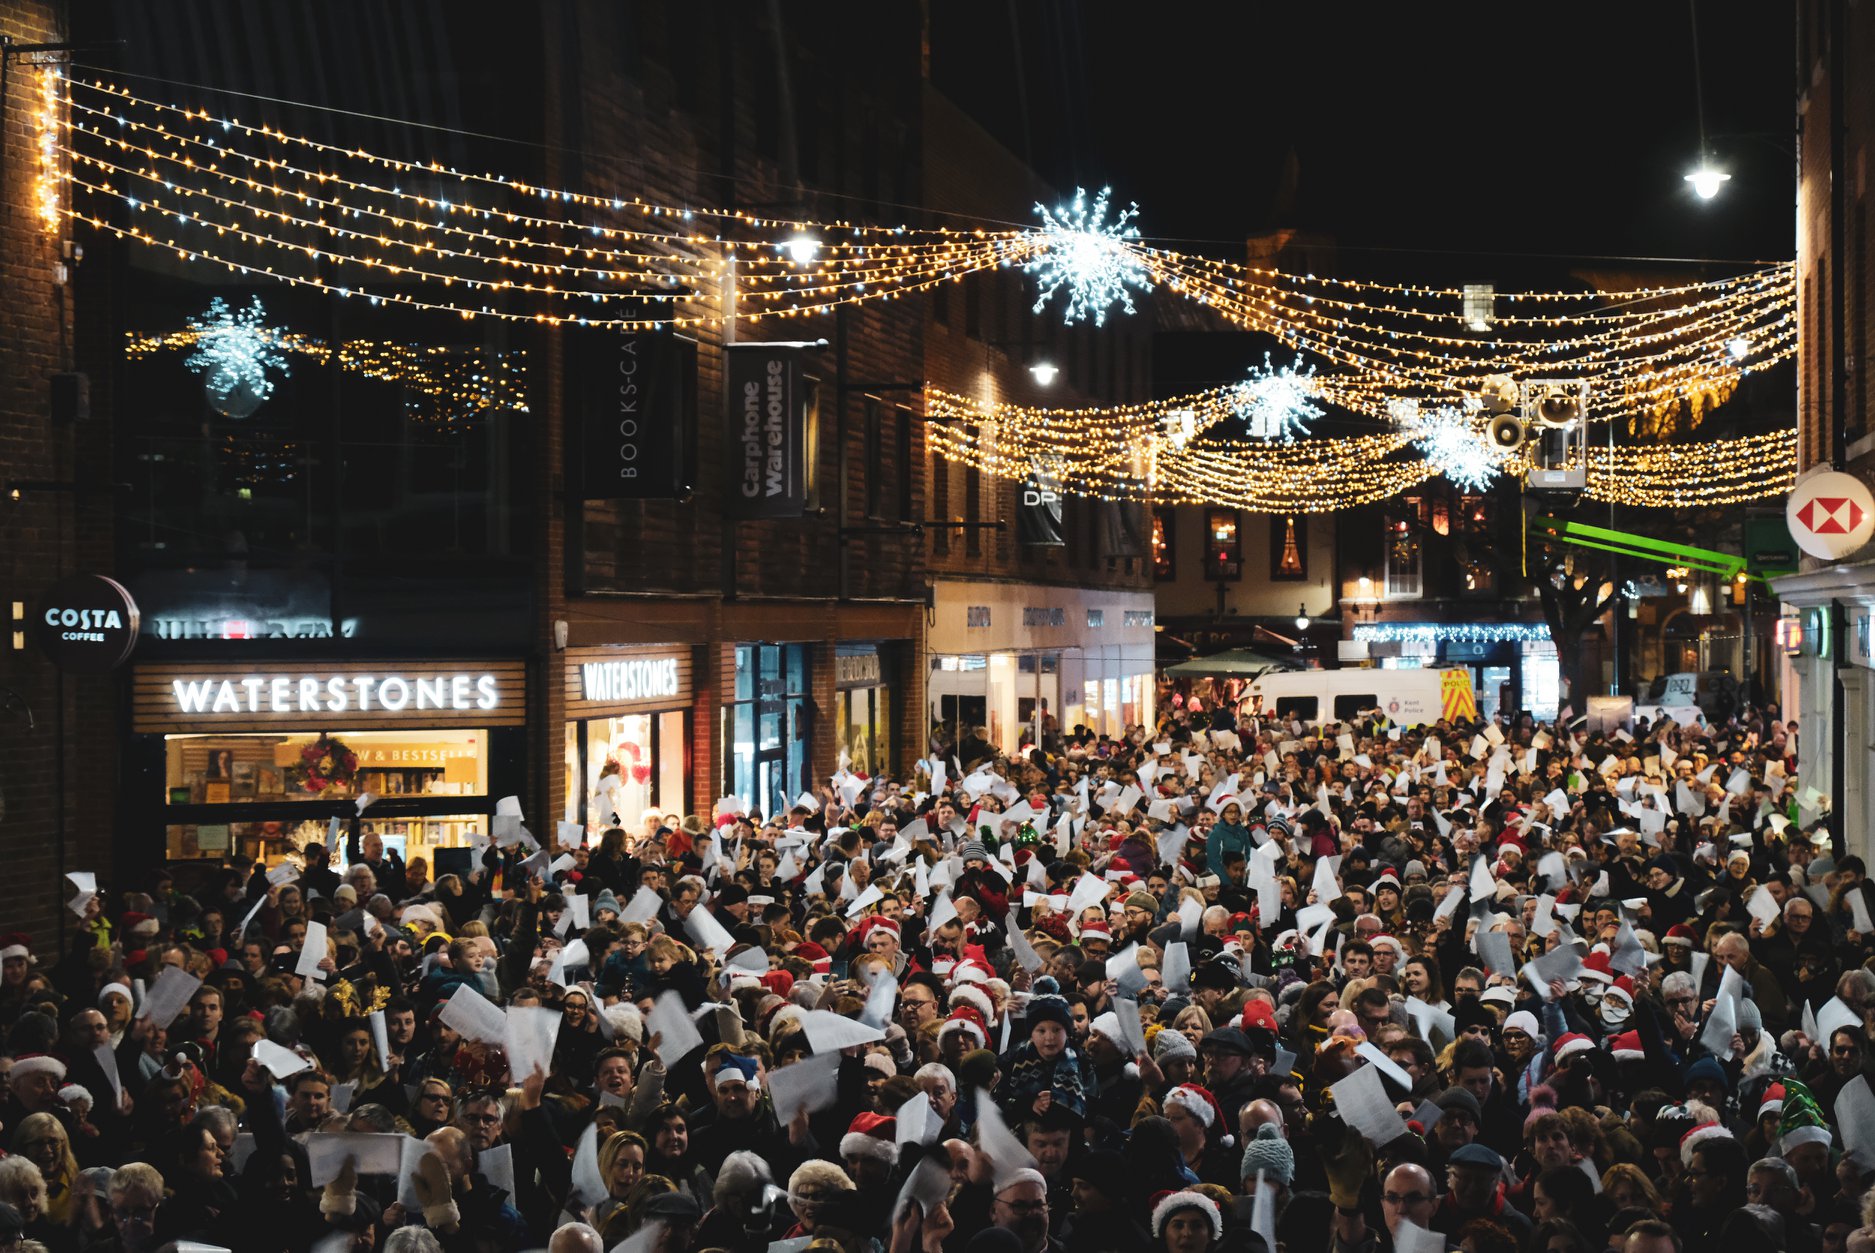 A photo of a large crowd in the streets of Canterbury taking part in a carol service